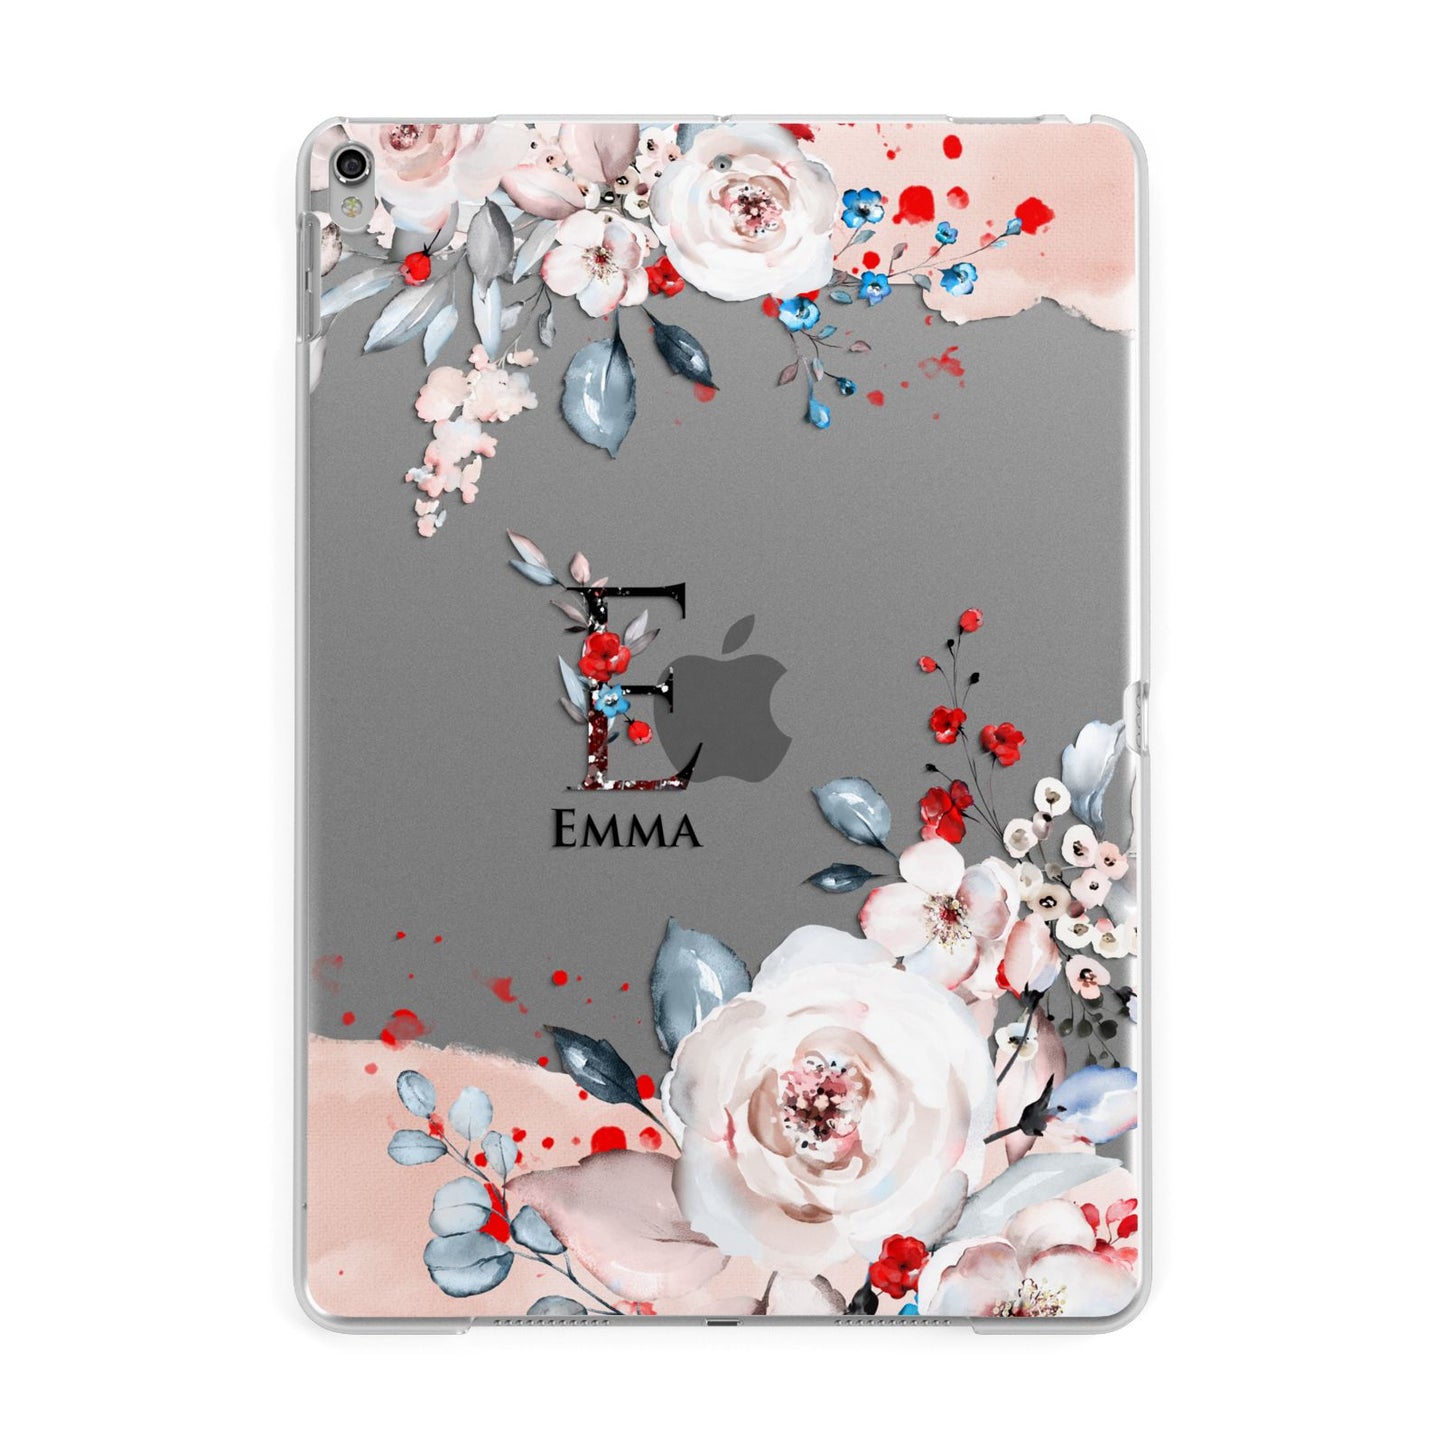 Monogrammed Roses Floral Wreath Apple iPad Silver Case